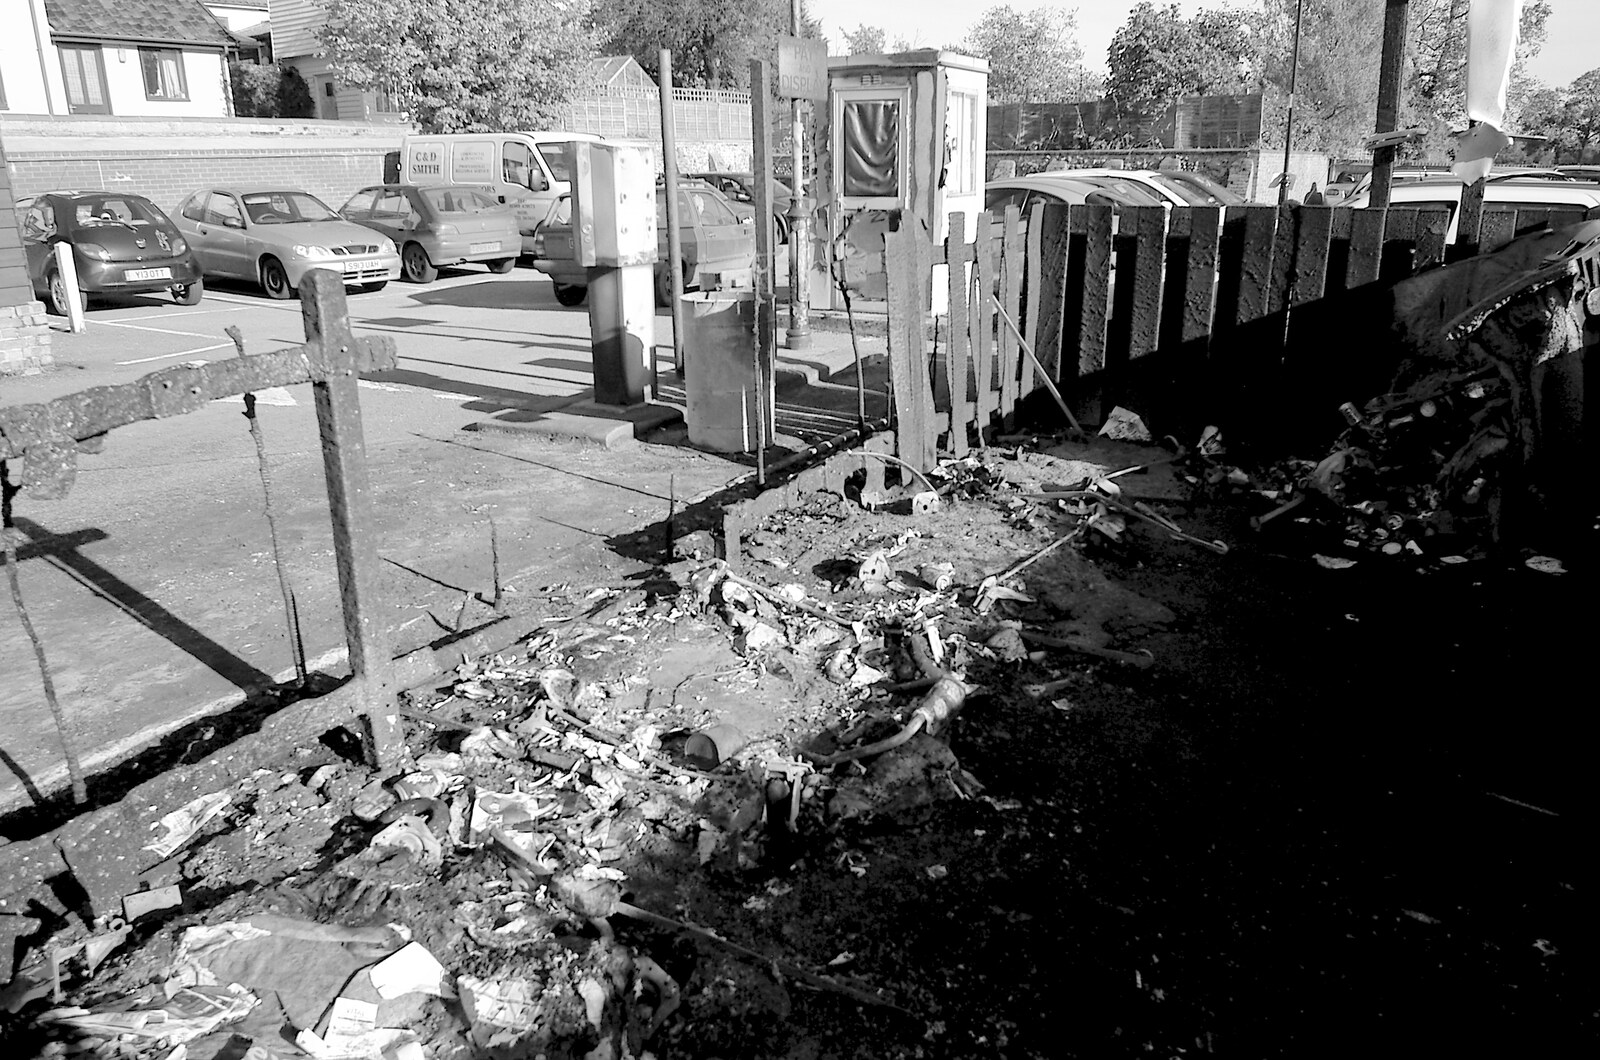 Scene of destruction from Burnt-out Recycling Bins and Fireworks from a Distance, Diss, Norfolk - 4th November 2005